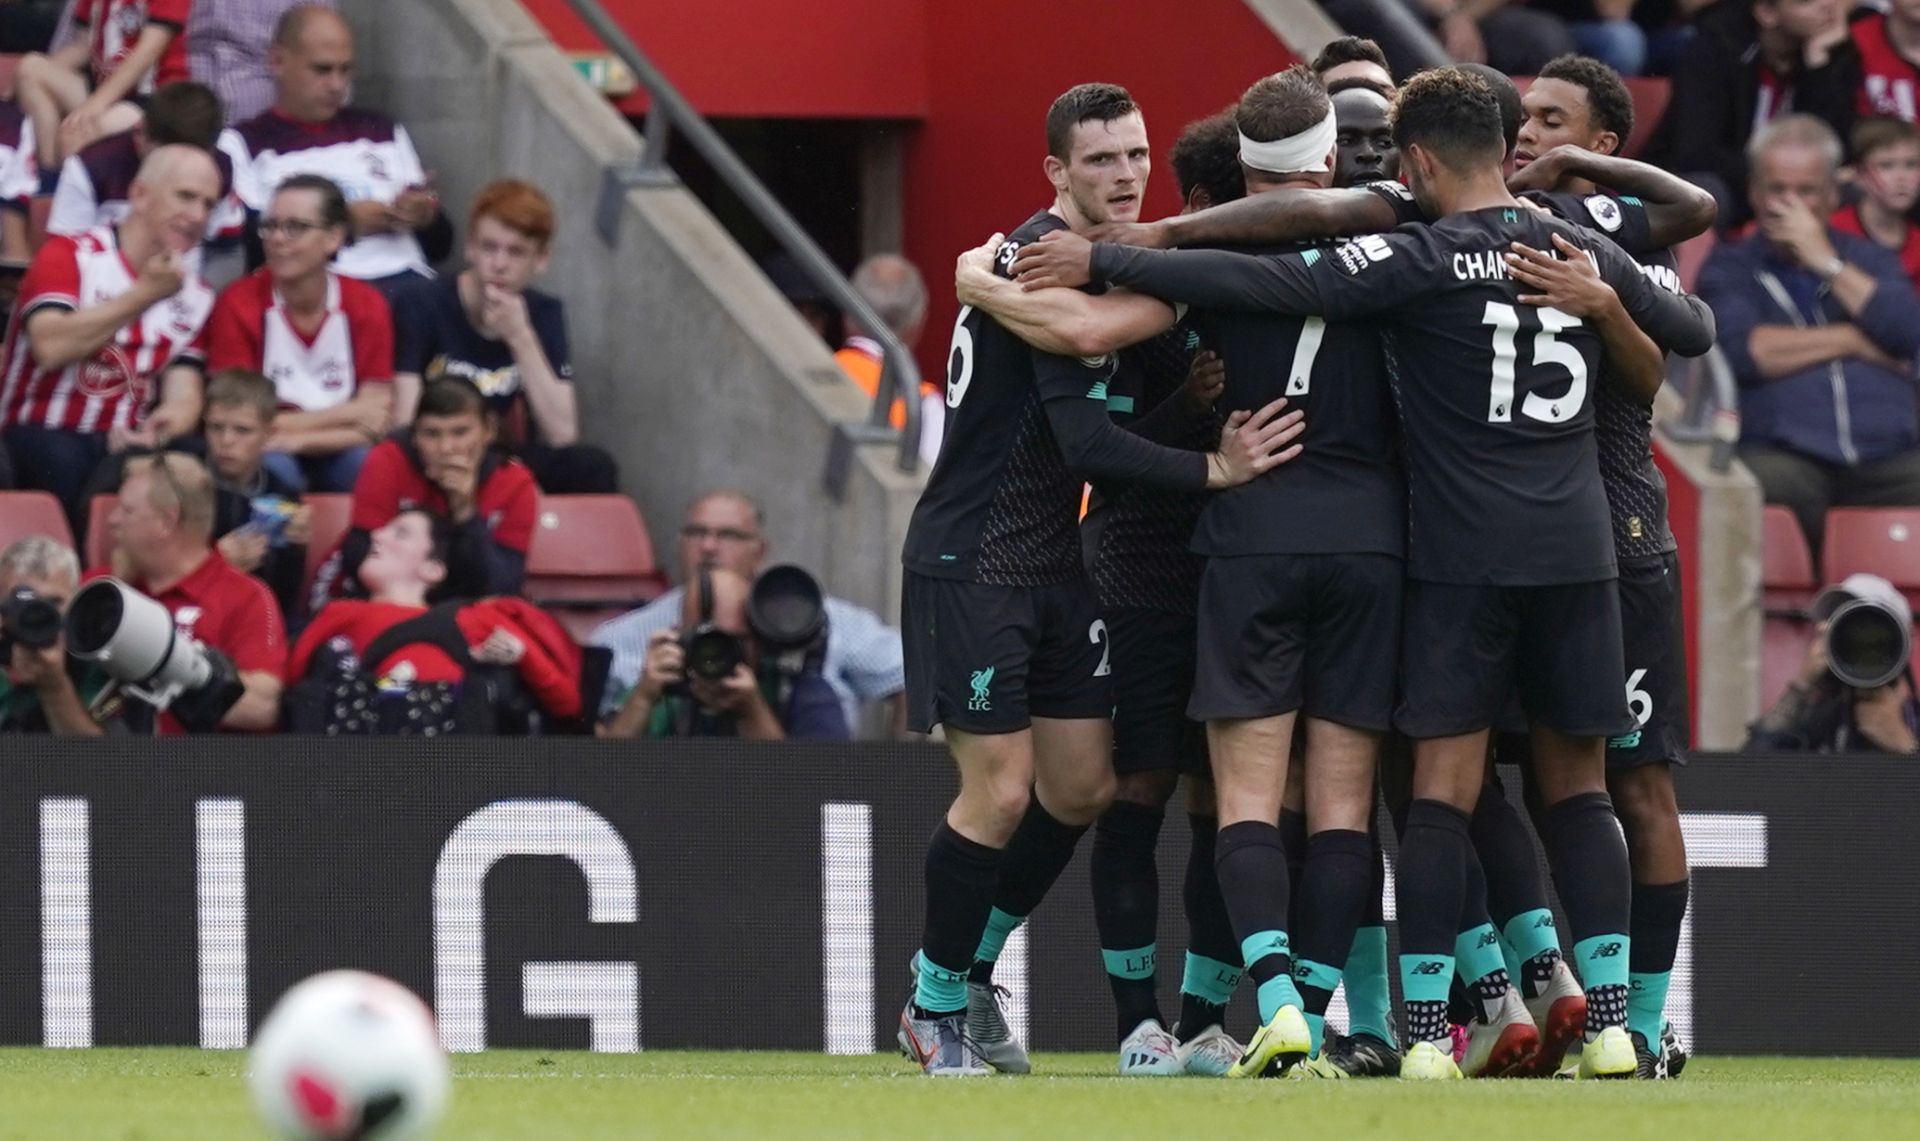 epa07777872 Liverpool players celebrate during the English Premier League soccer match between Southampton and Liverpool at St Mary's Stadium, Southampton, Britain, 17 August 2019.  EPA/WILL OLIVER EDITORIAL USE ONLY. No use with unauthorized audio, video, data, fixture lists, club/league logos or 'live' services. Online in-match use limited to 120 images, no video emulation. No use in betting, games or single club/league/player publications